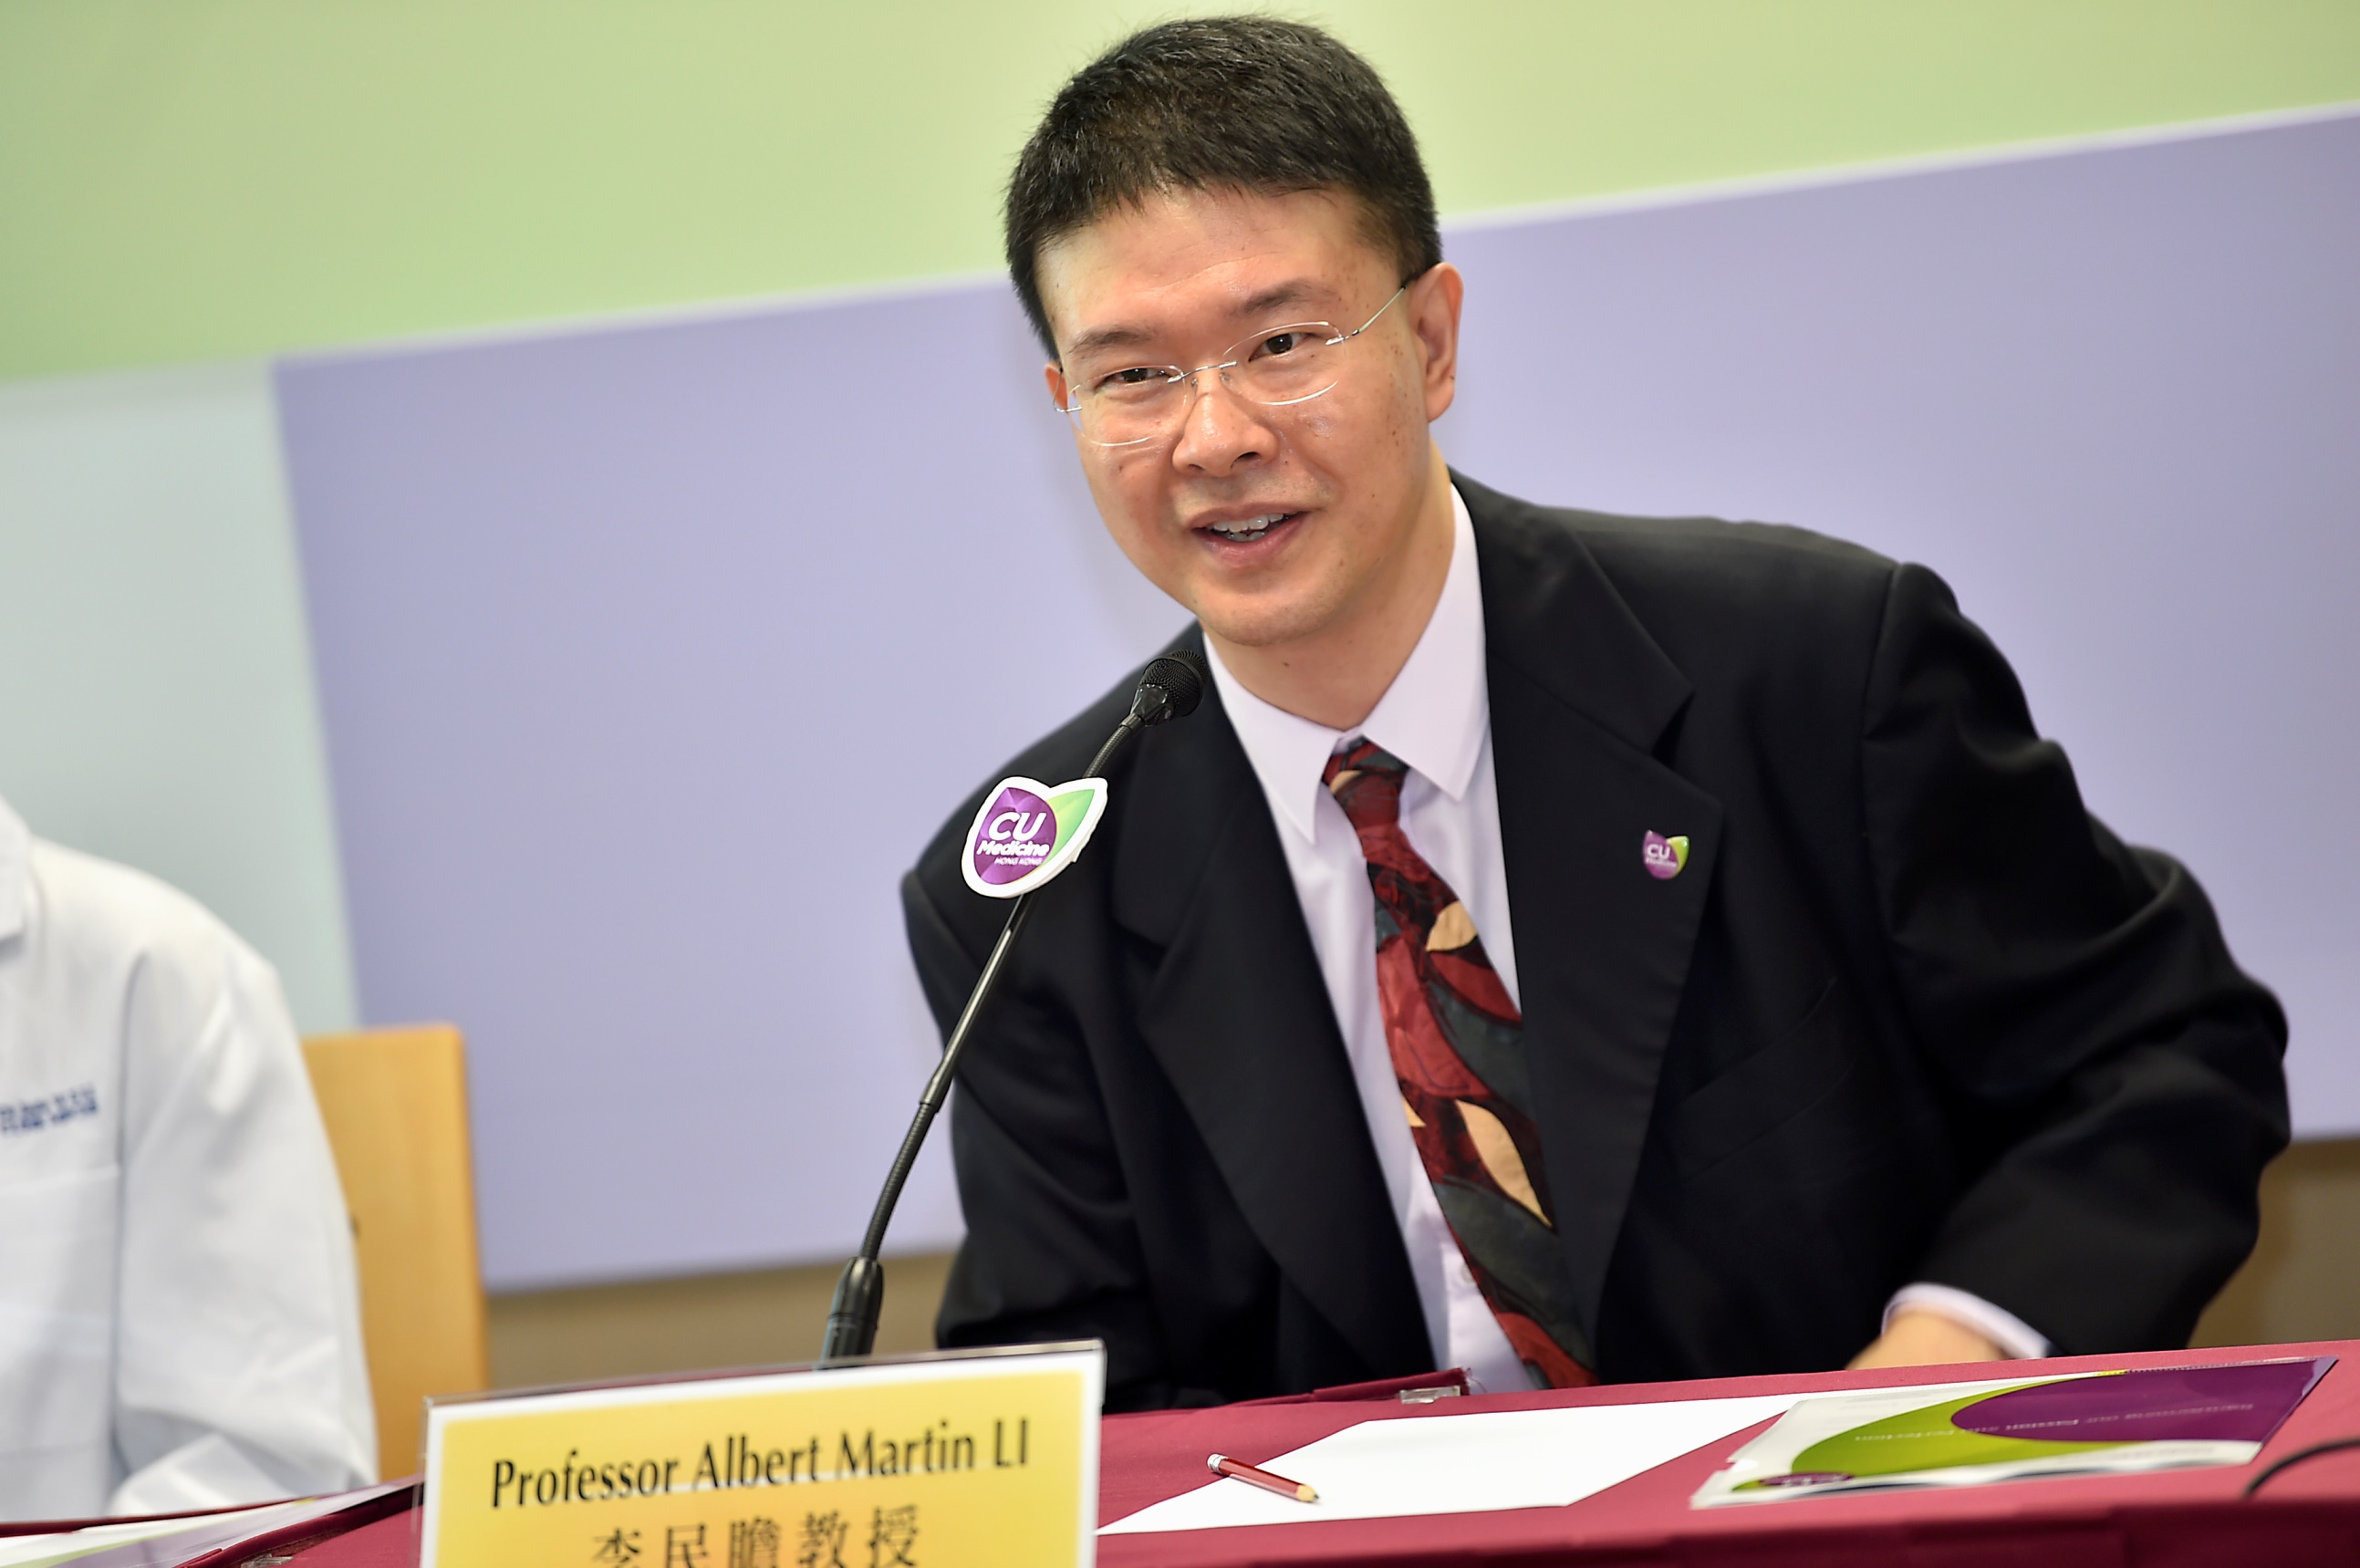 Professor Albert LI states that inadequate sleep is a common global phenomenon in modern society, prompt intervention is needed to prevent the increase in future cardiovascular events.